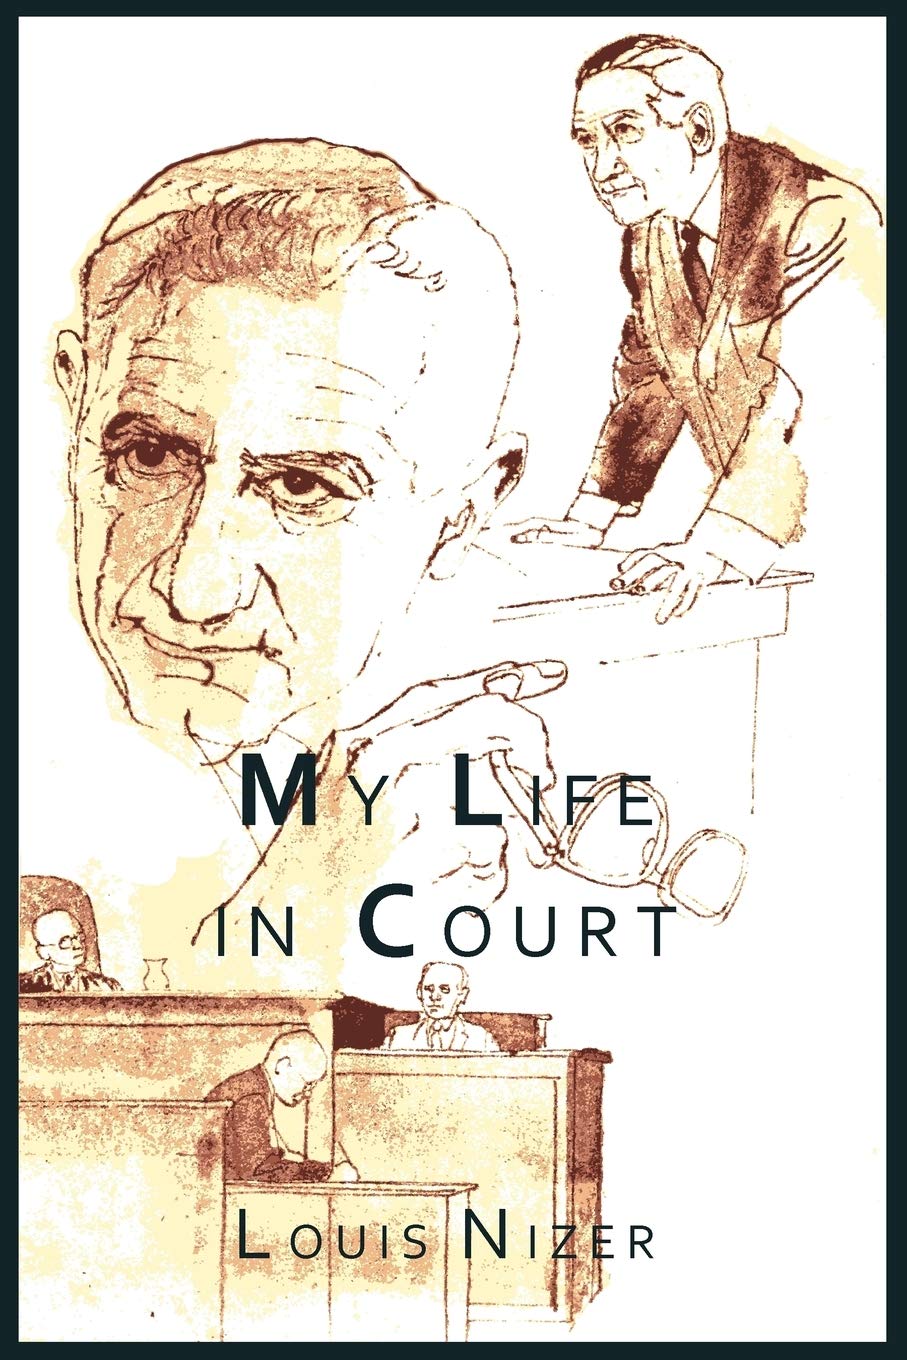 My Life in Court by Louis Nizer